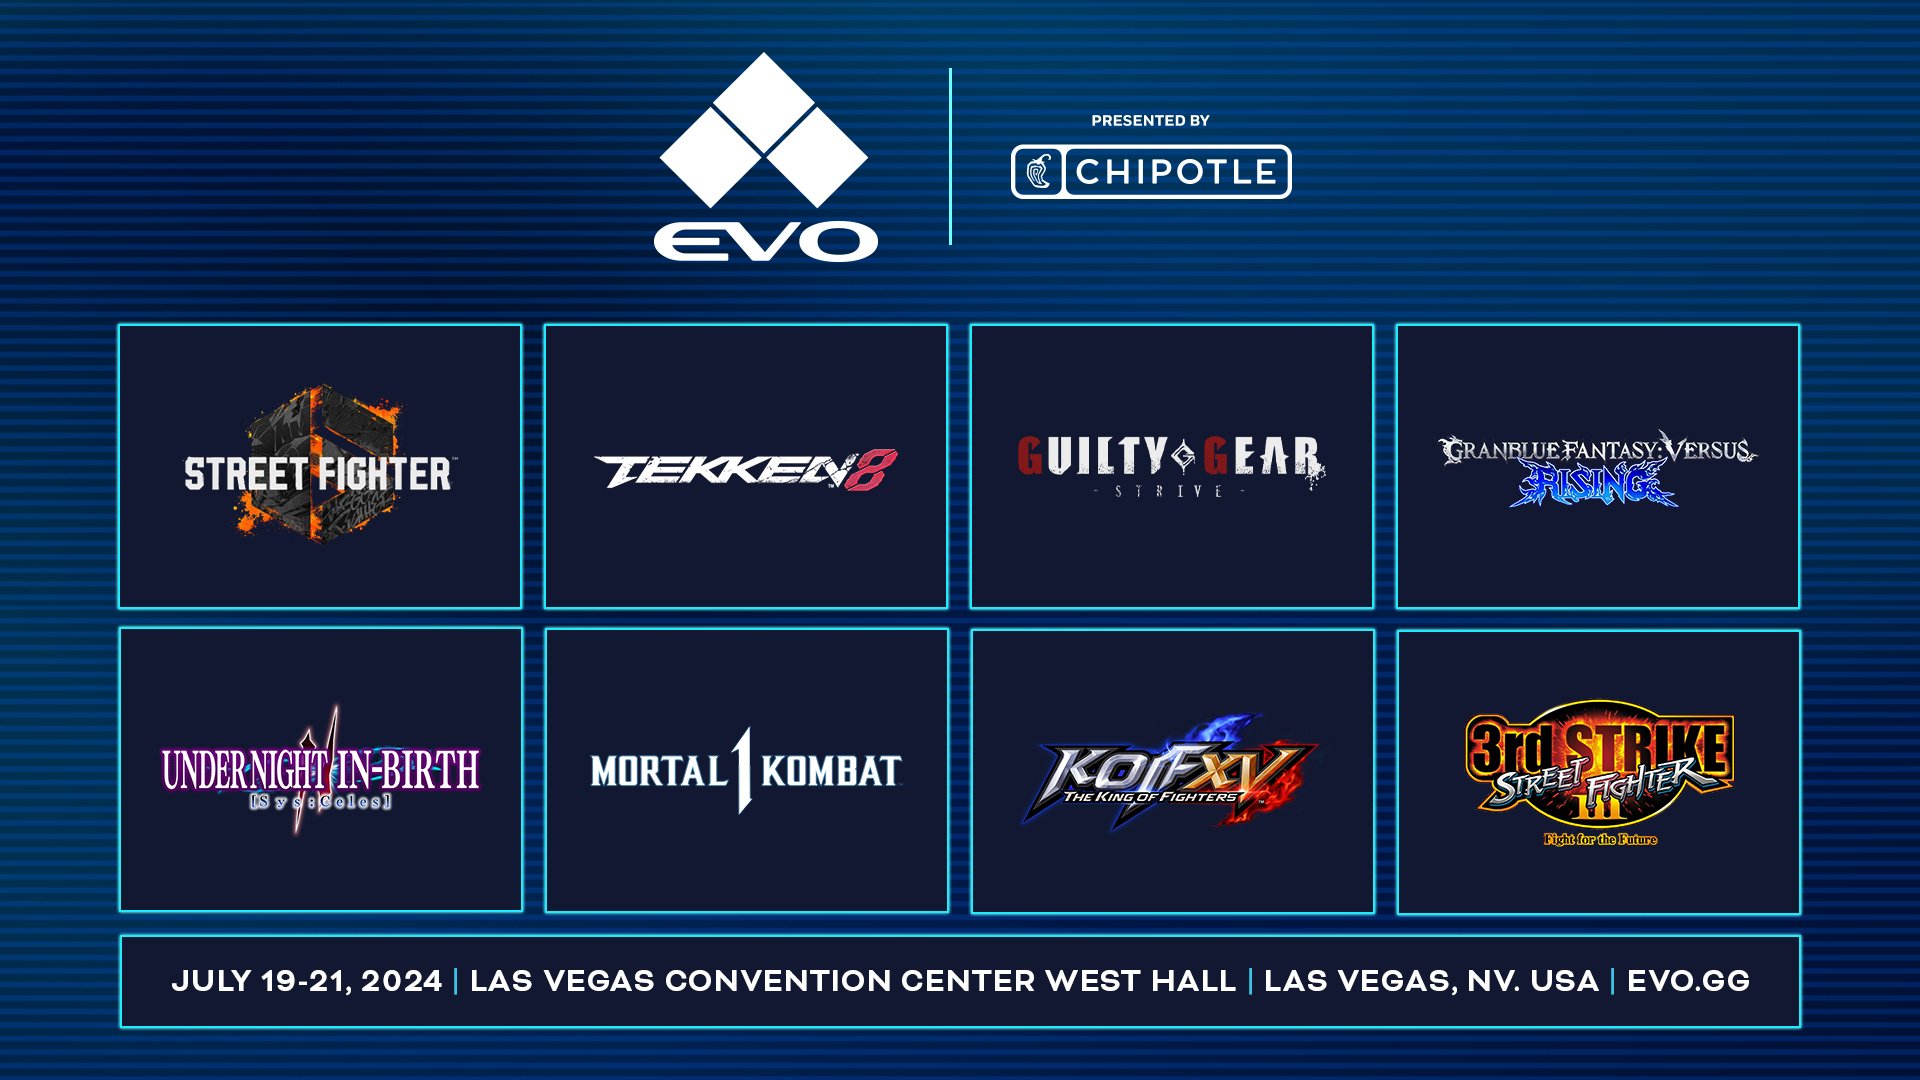 Under Night In-Birth II [Sys:Celes] was selected as the main event of EVO